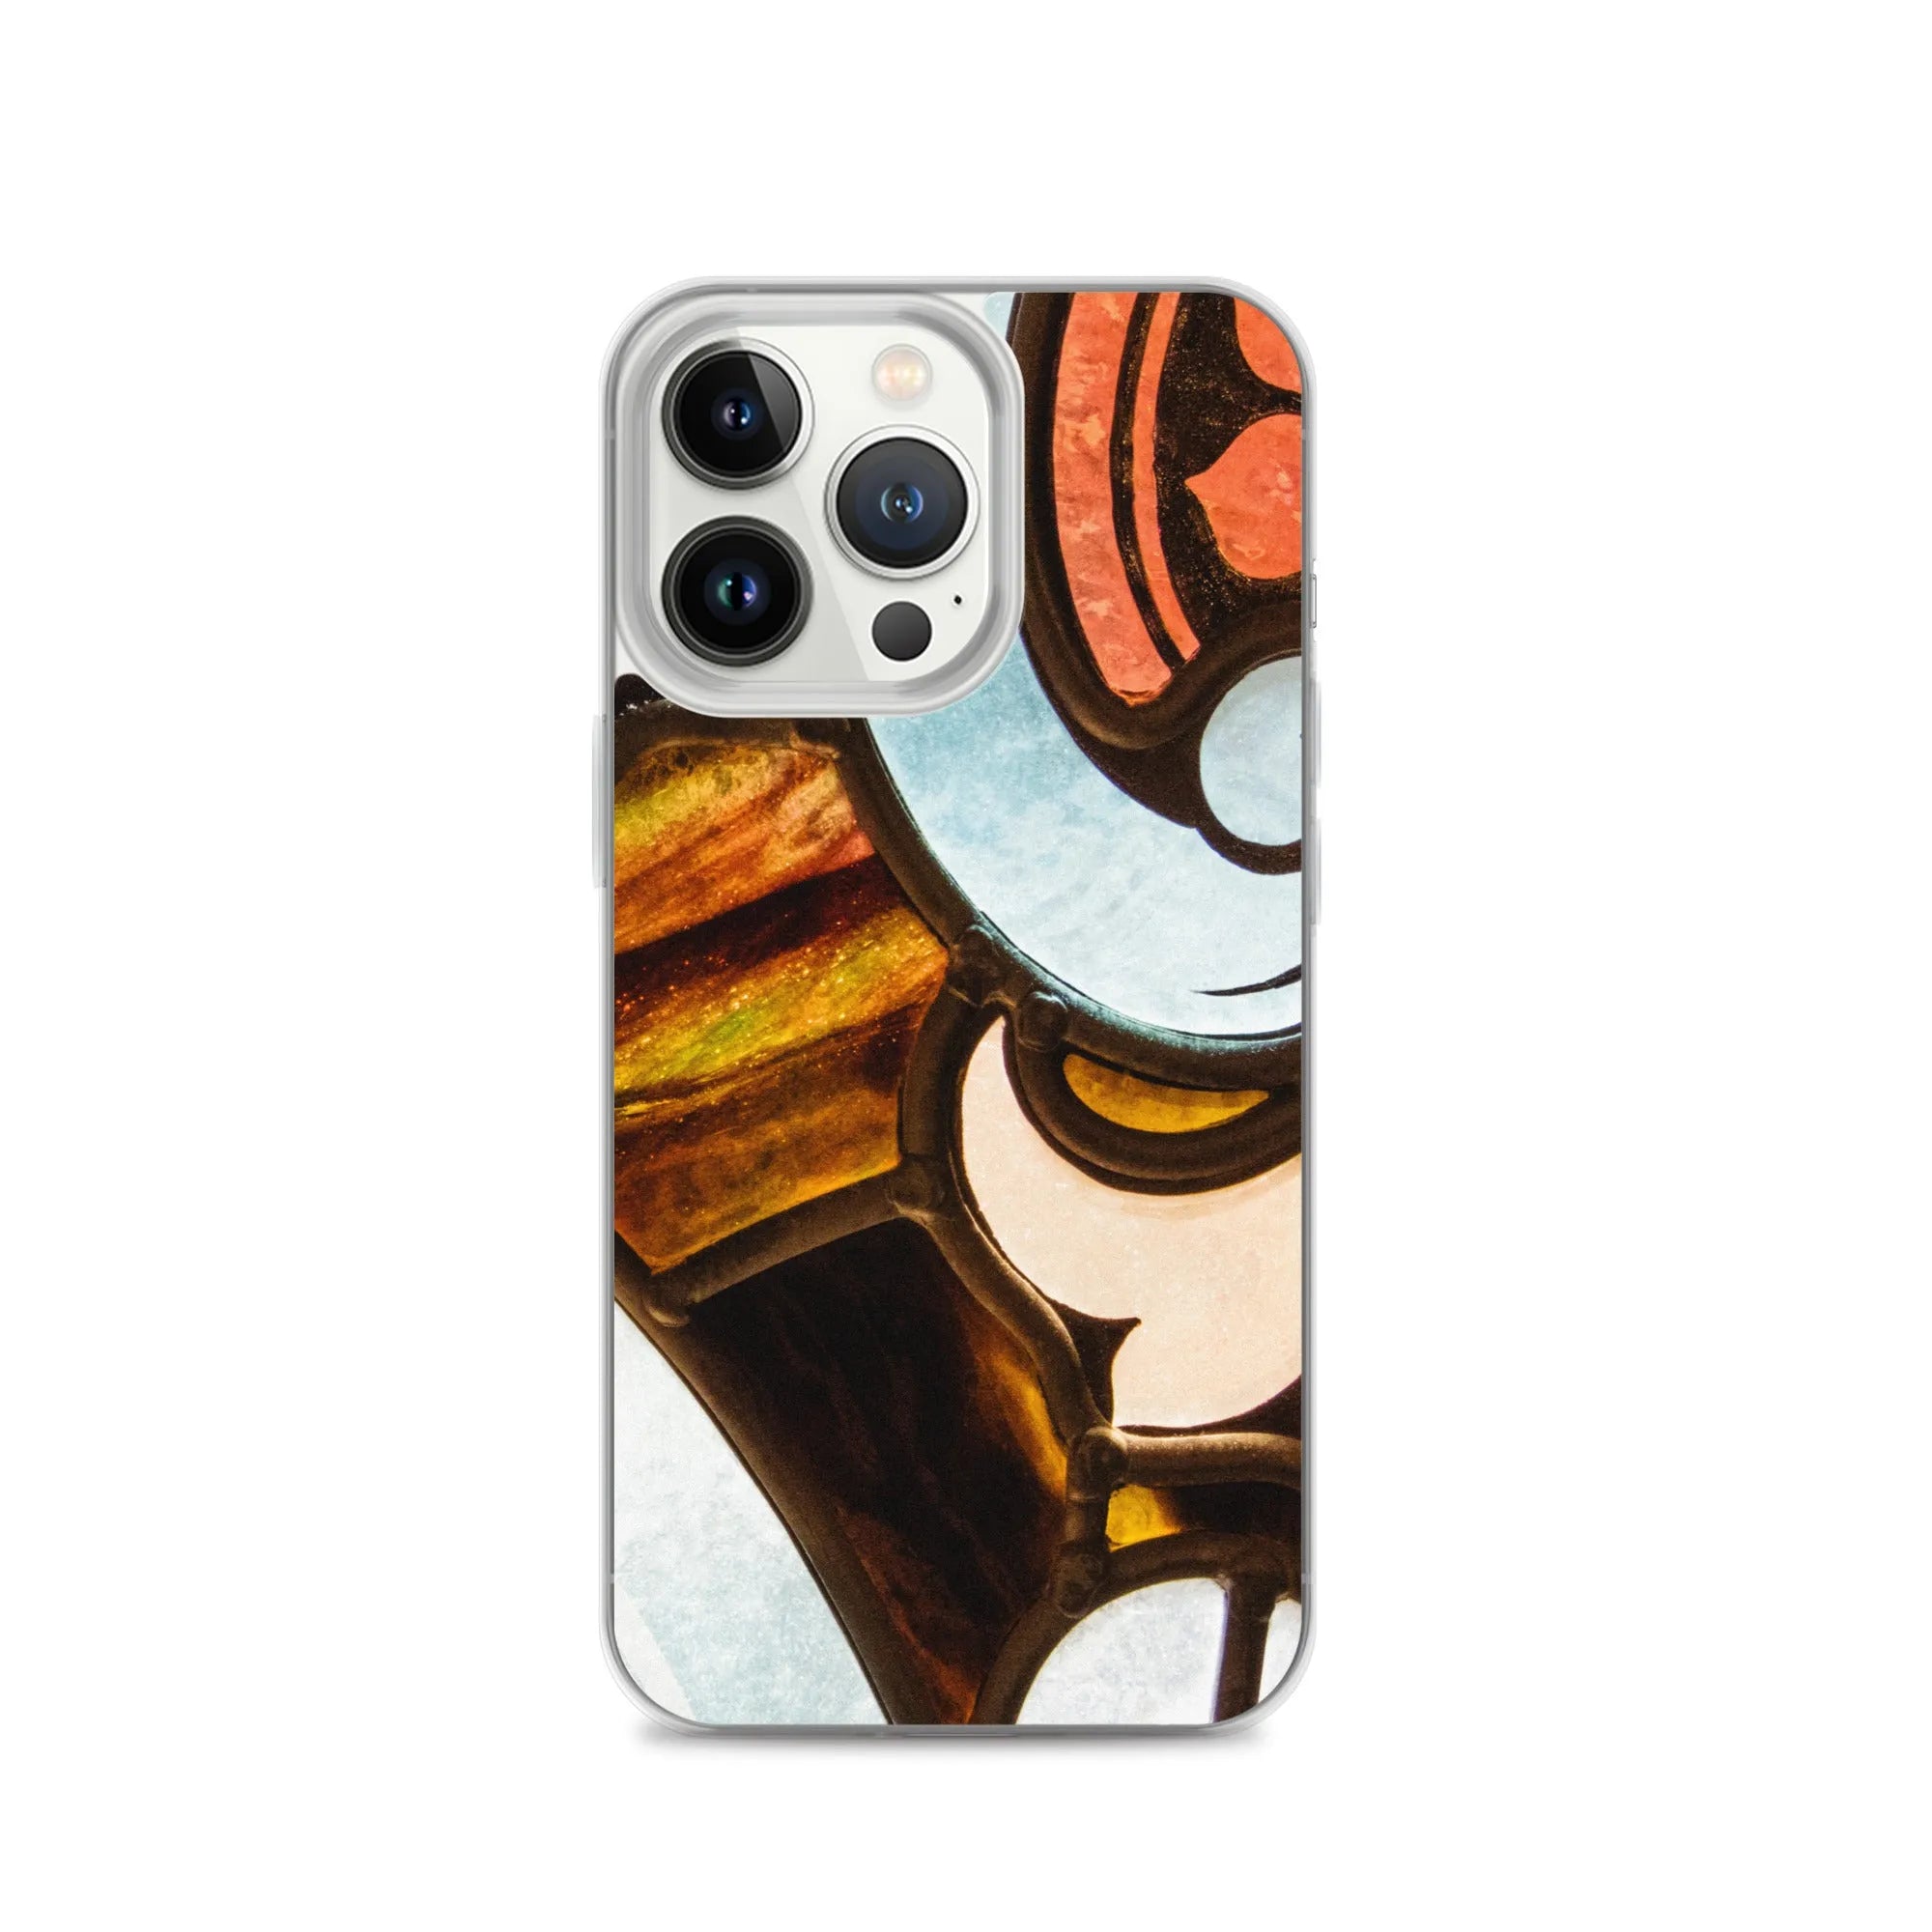 Stay Glassy - Designer Travels Art Iphone Case - Iphone 13 Pro - Mobile Phone Cases - Aesthetic Art